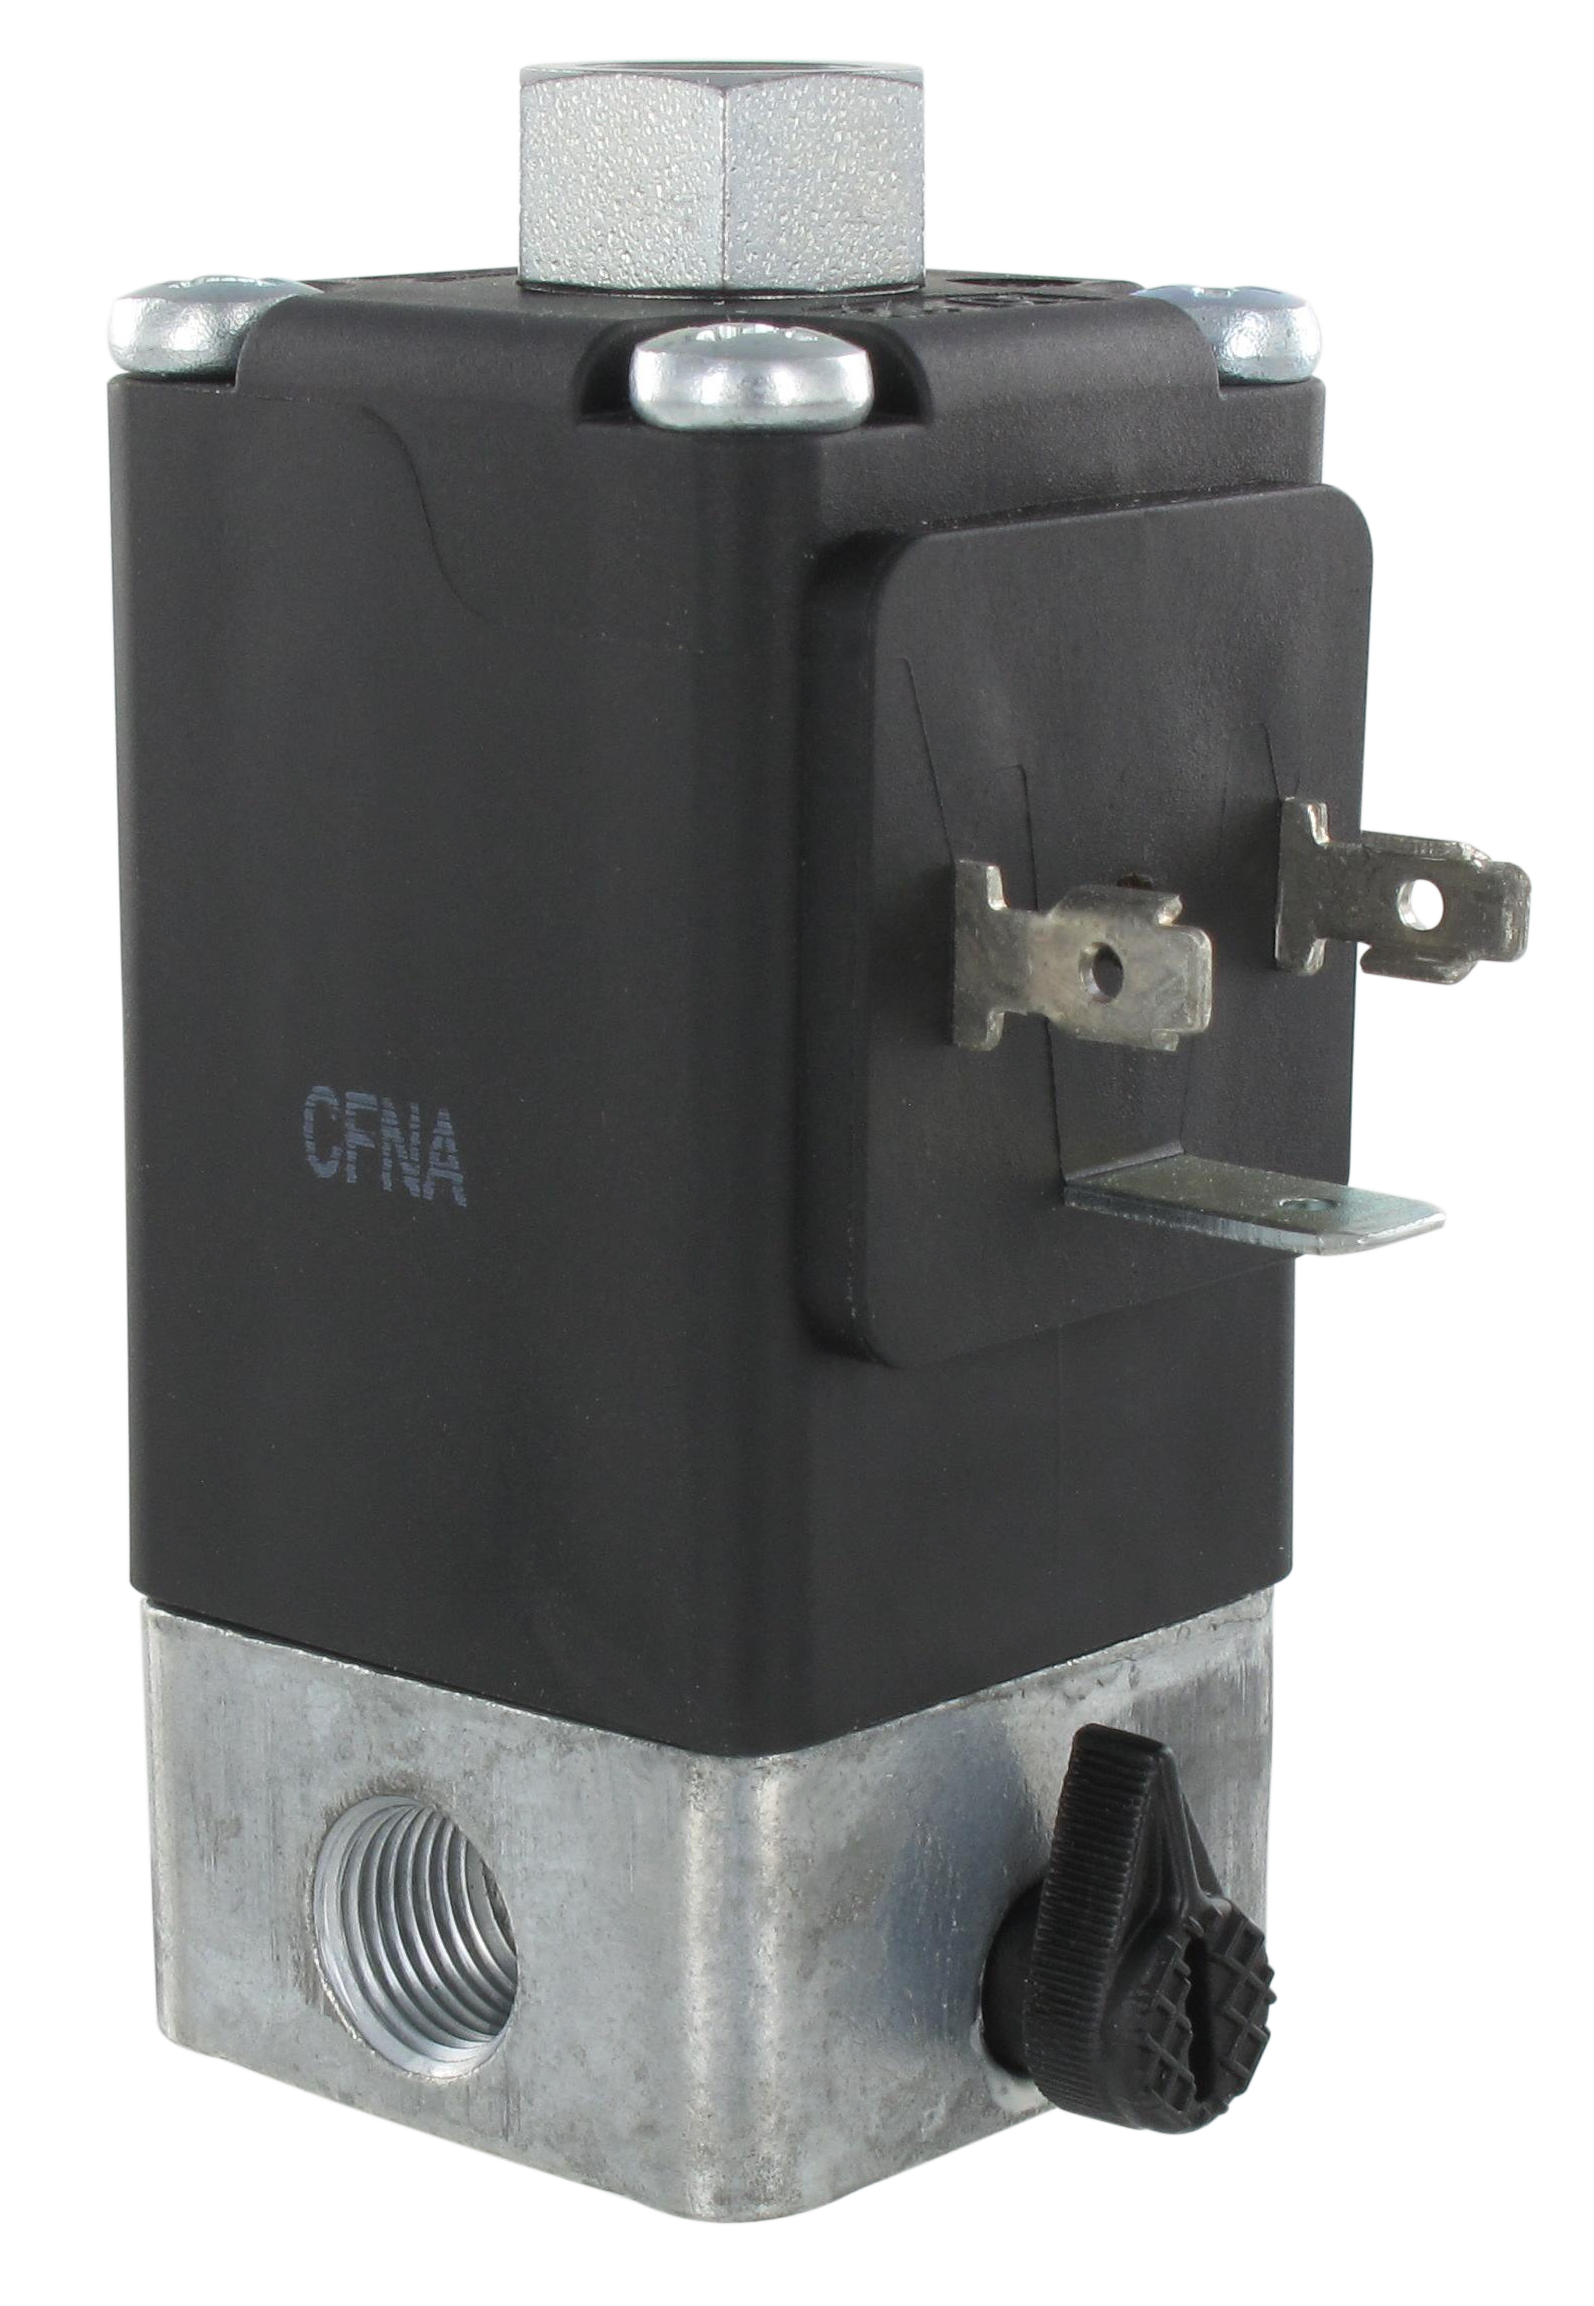 3-way pneumatic solenoid valves G1/8\" size 32 mm UL - Direct operated pneumatic spool valves